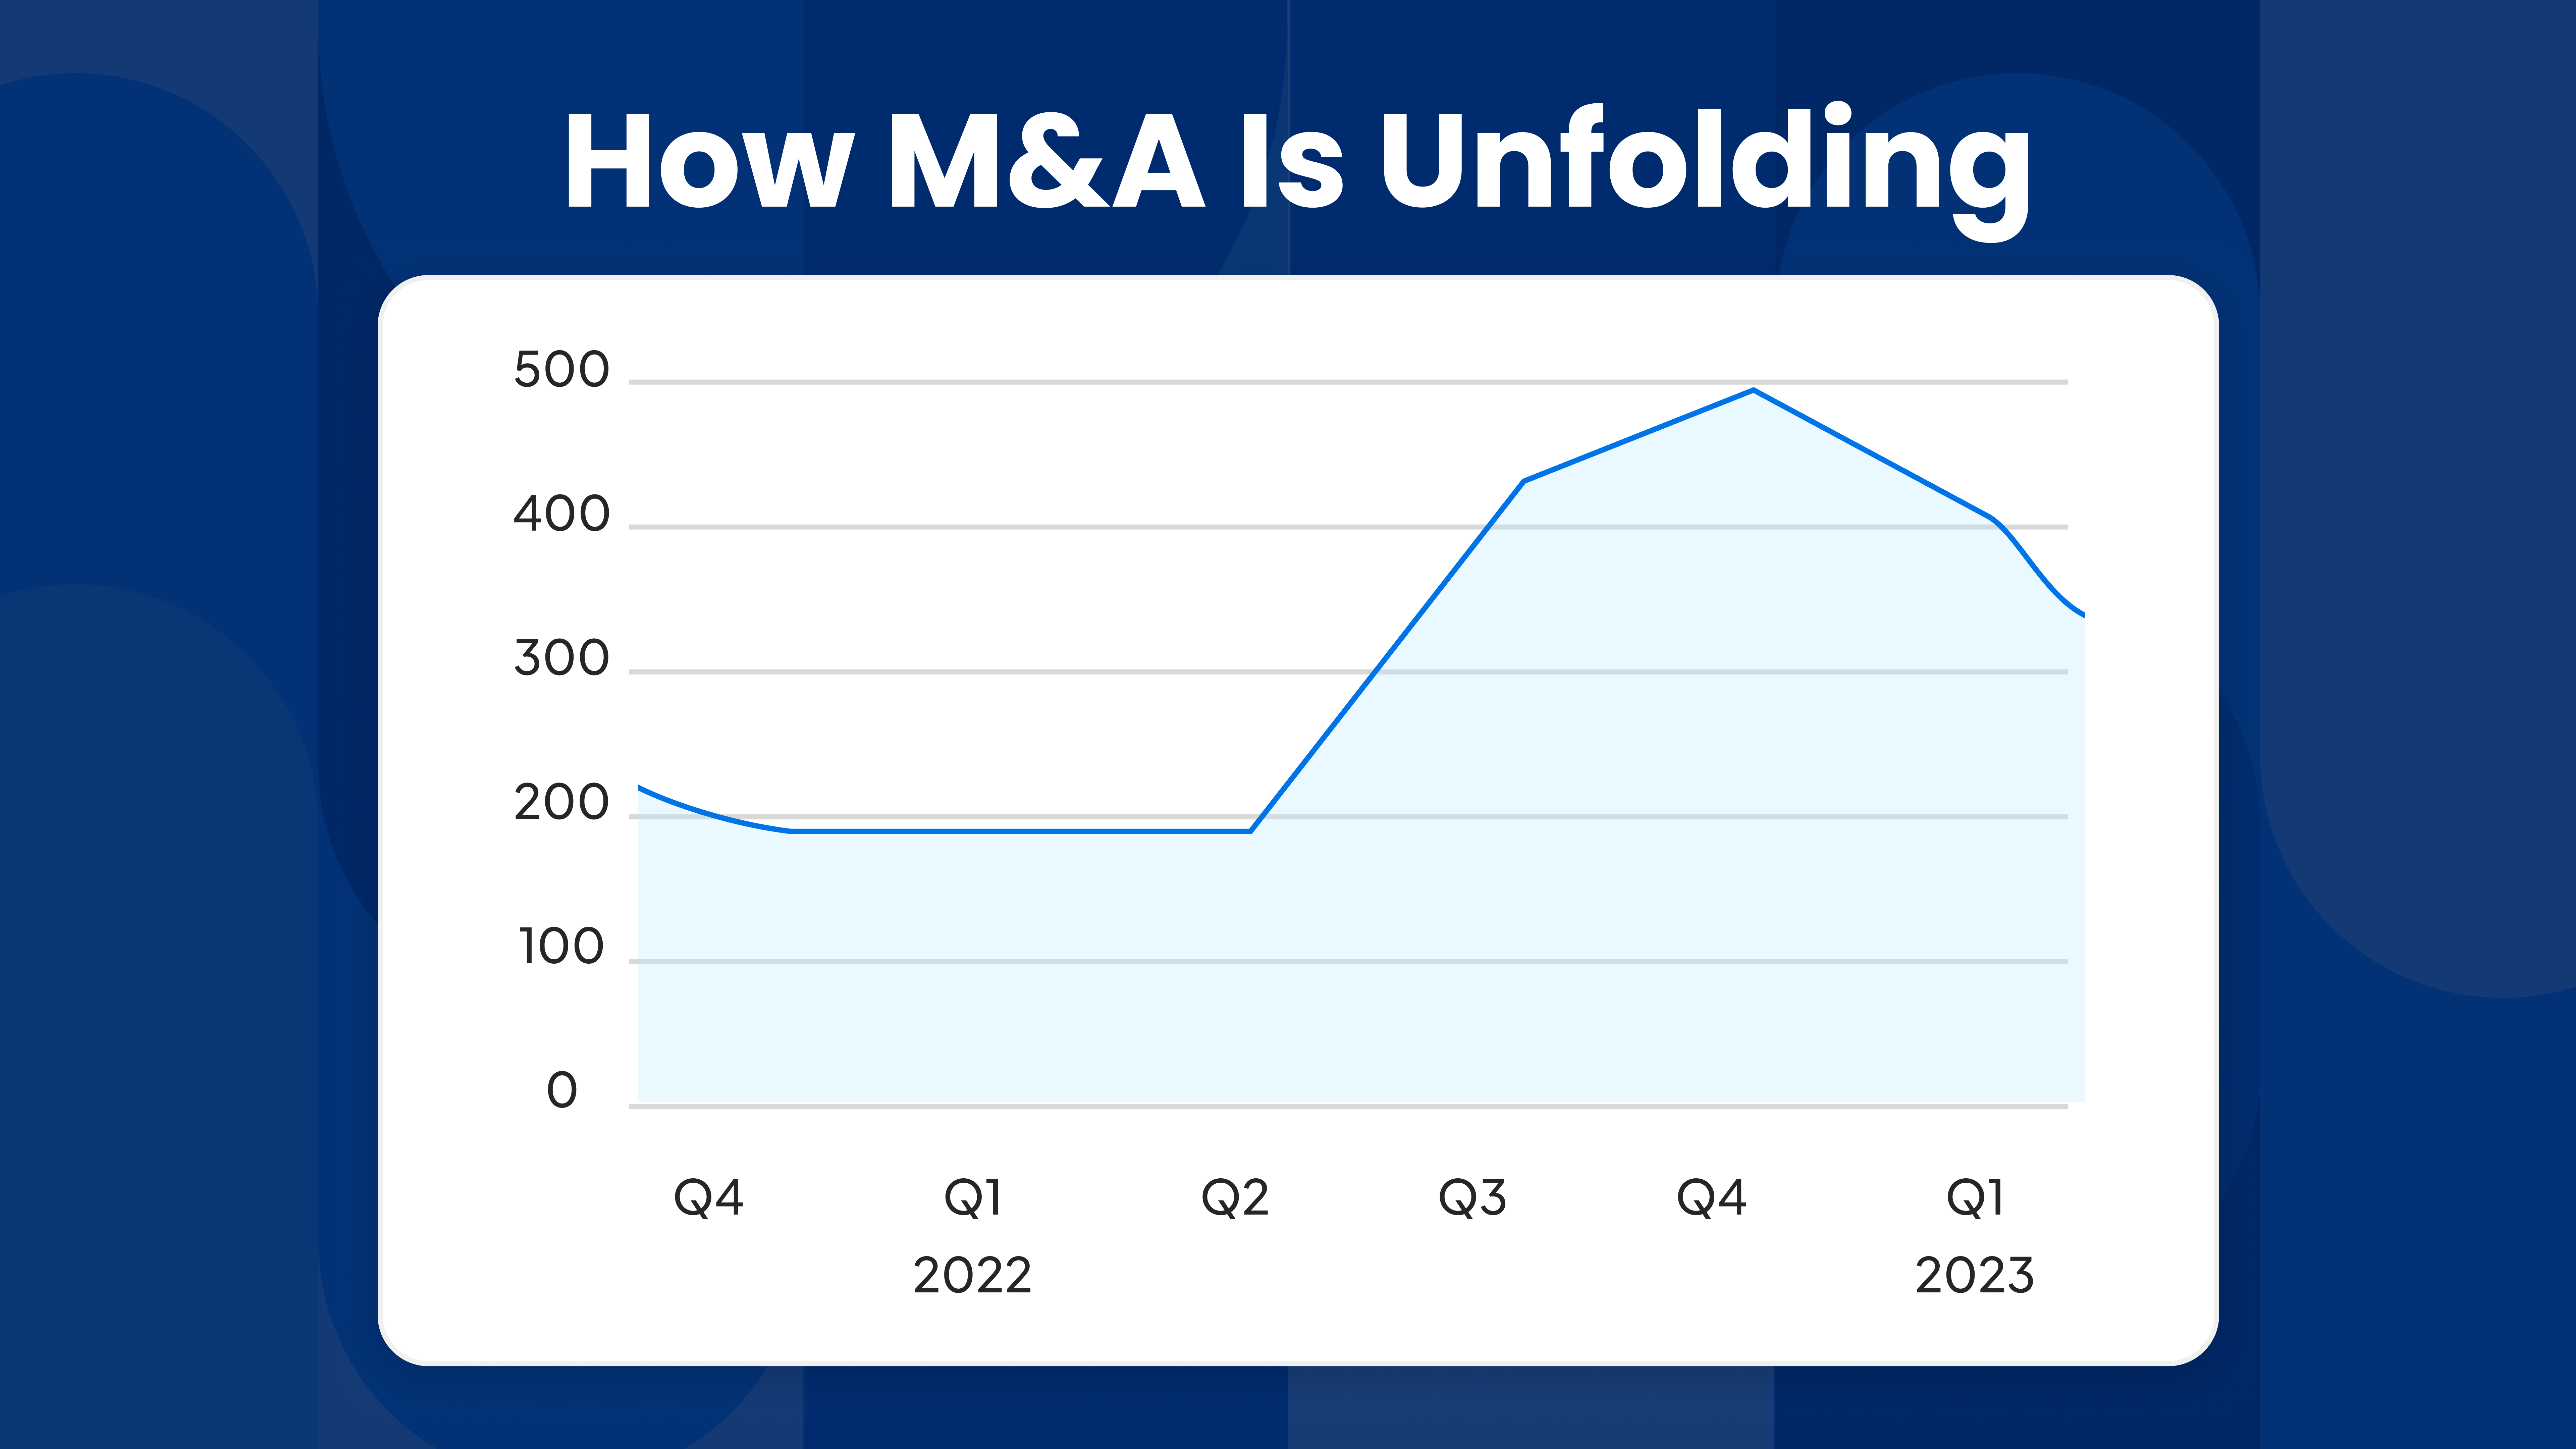 A guide to navigating life sciences M&A in 2023.